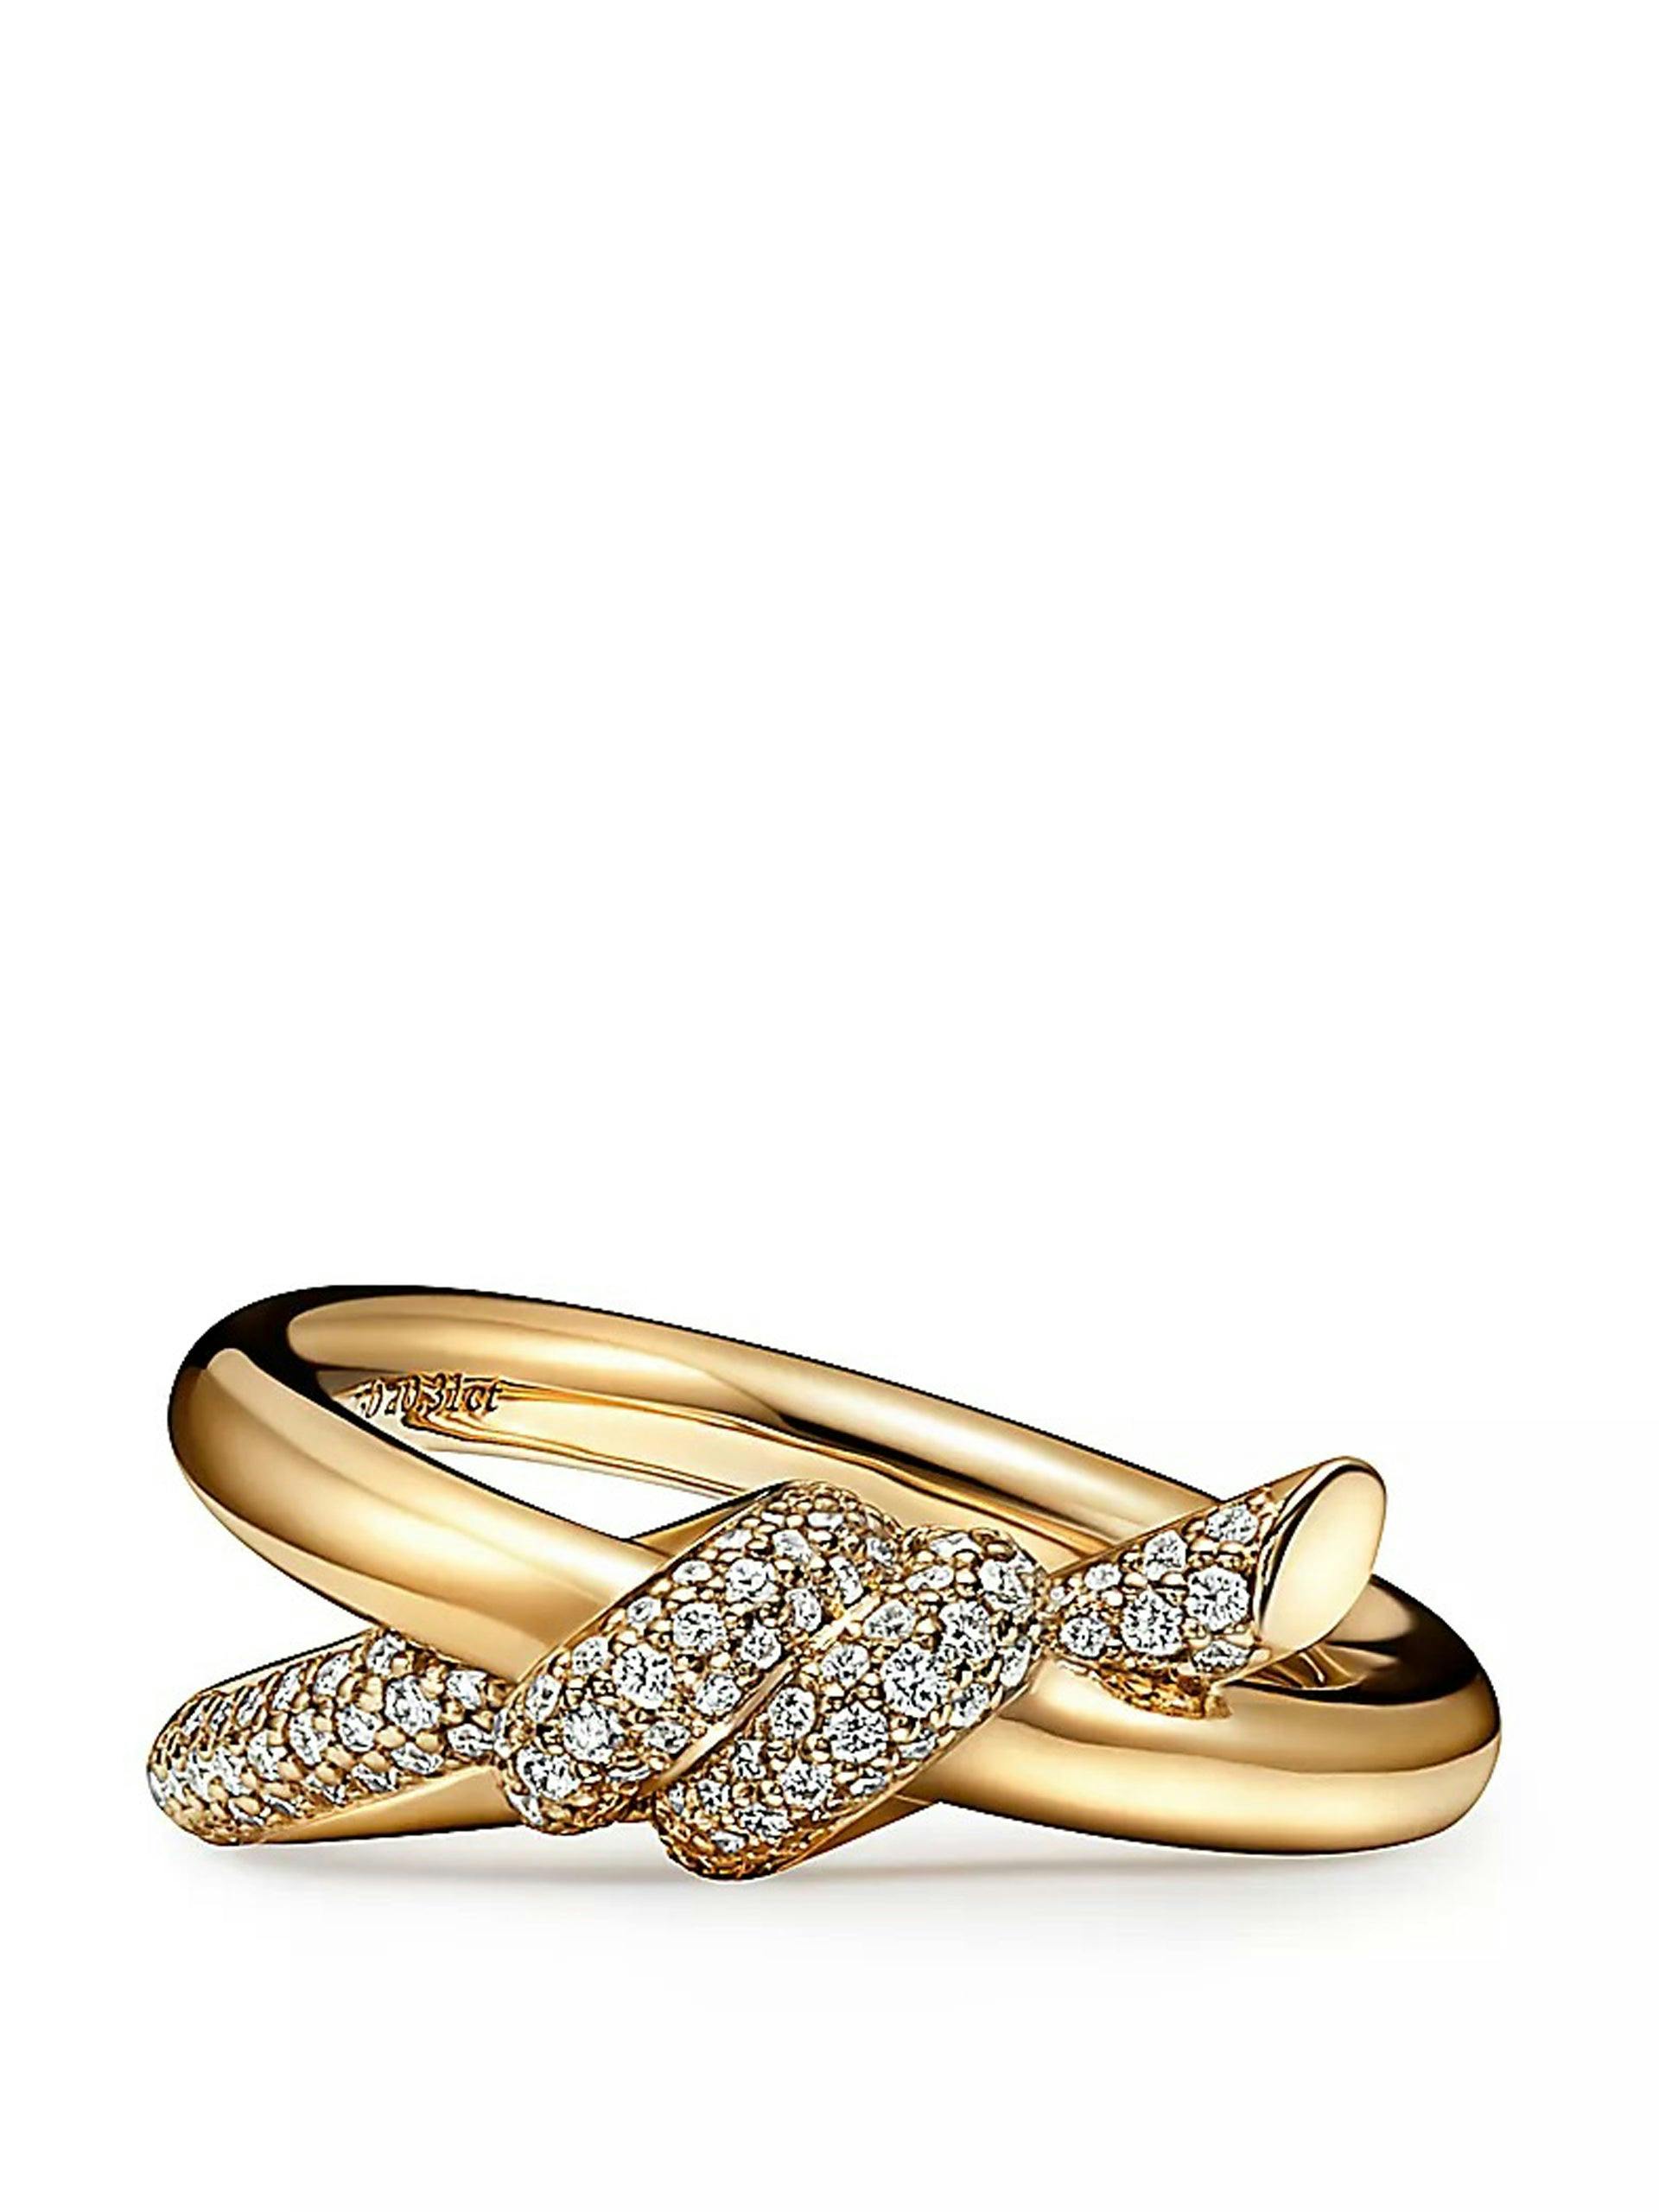 Knot double row ring